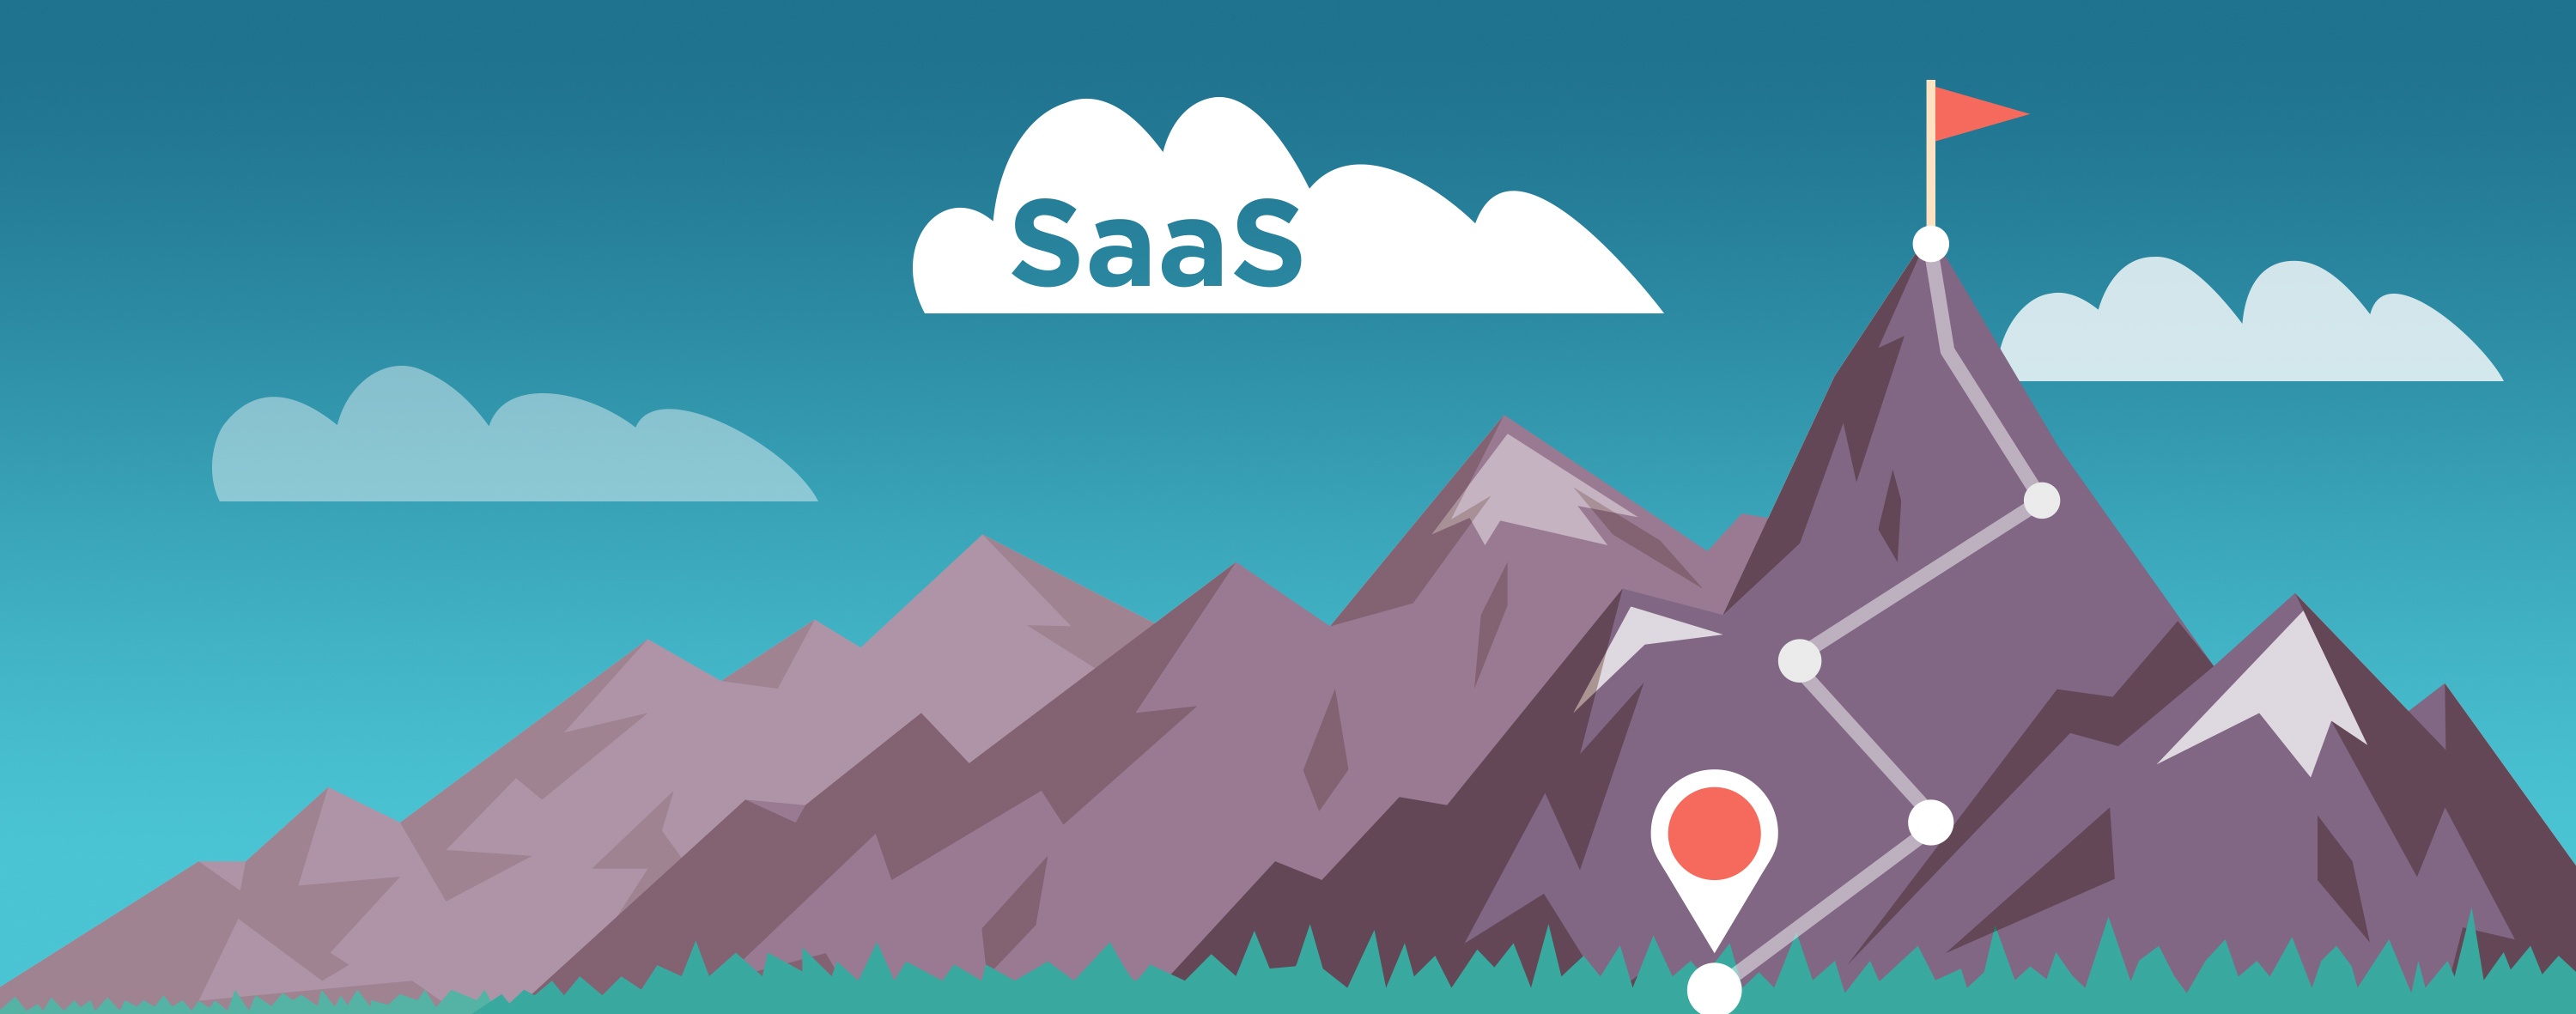 conquering the saas mountain software as a service content